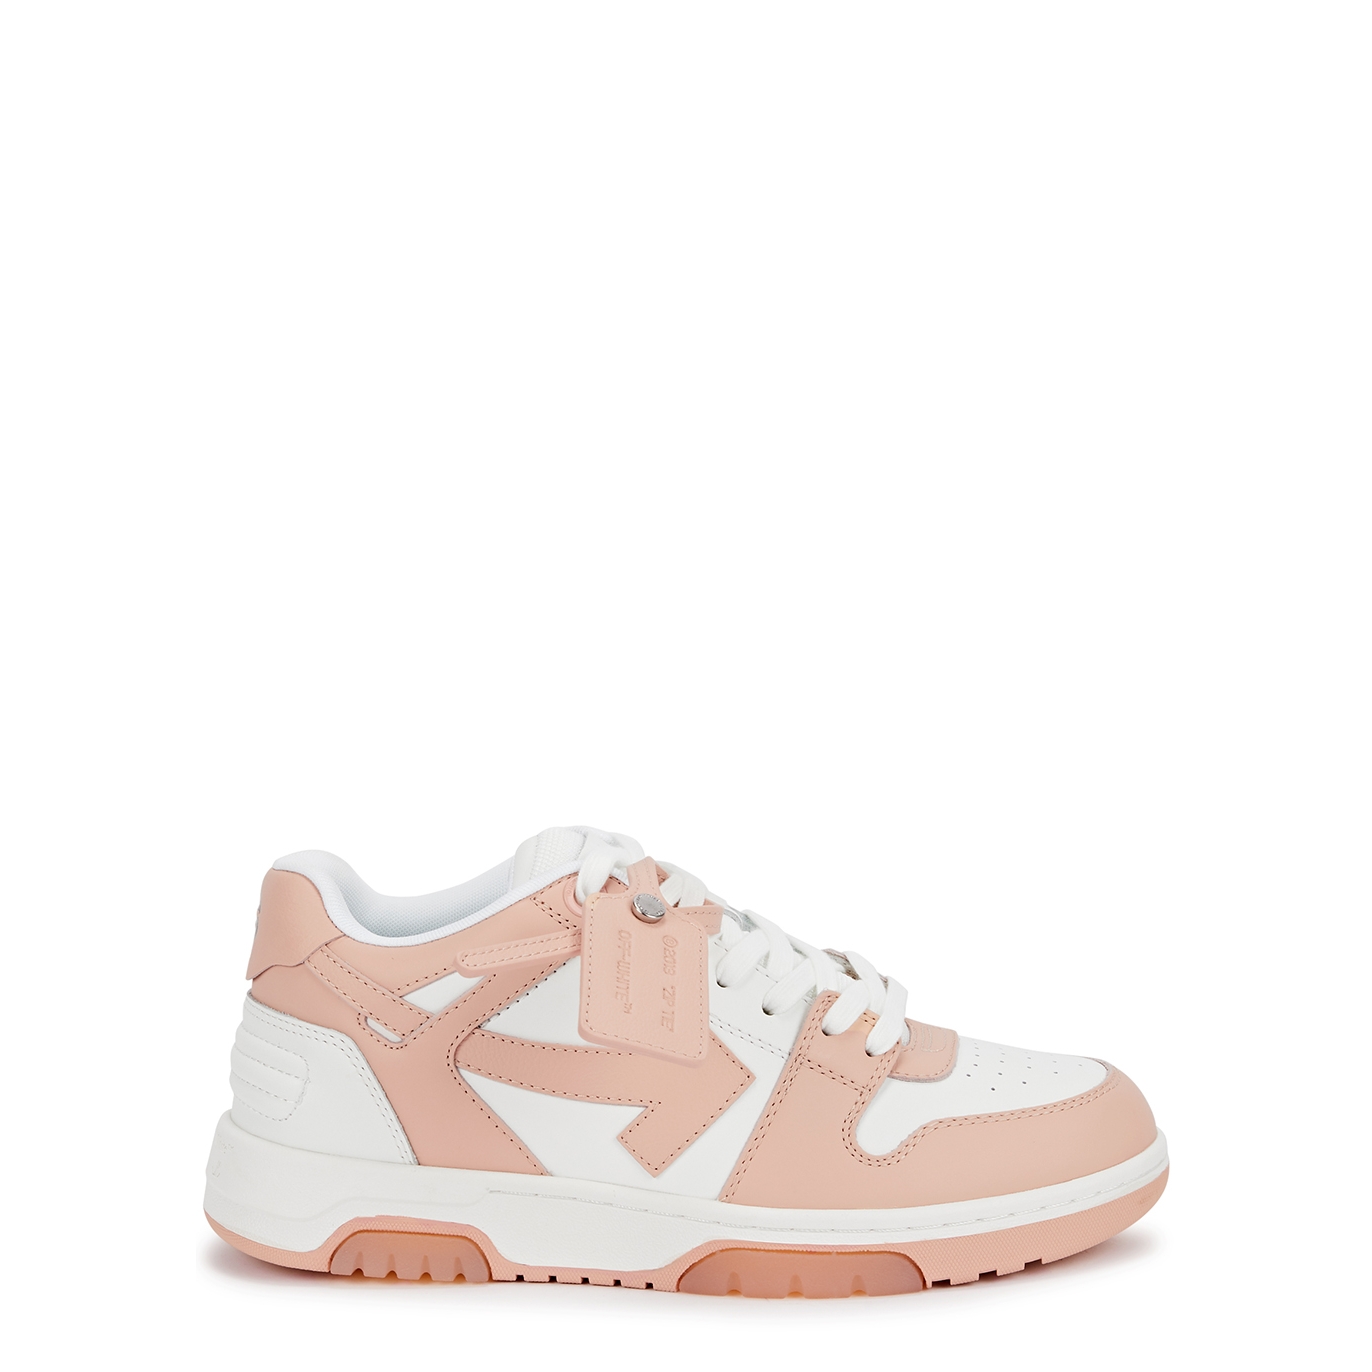 Off-White Out Of Office Panelled Leather Sneakers - Light Pink - 8